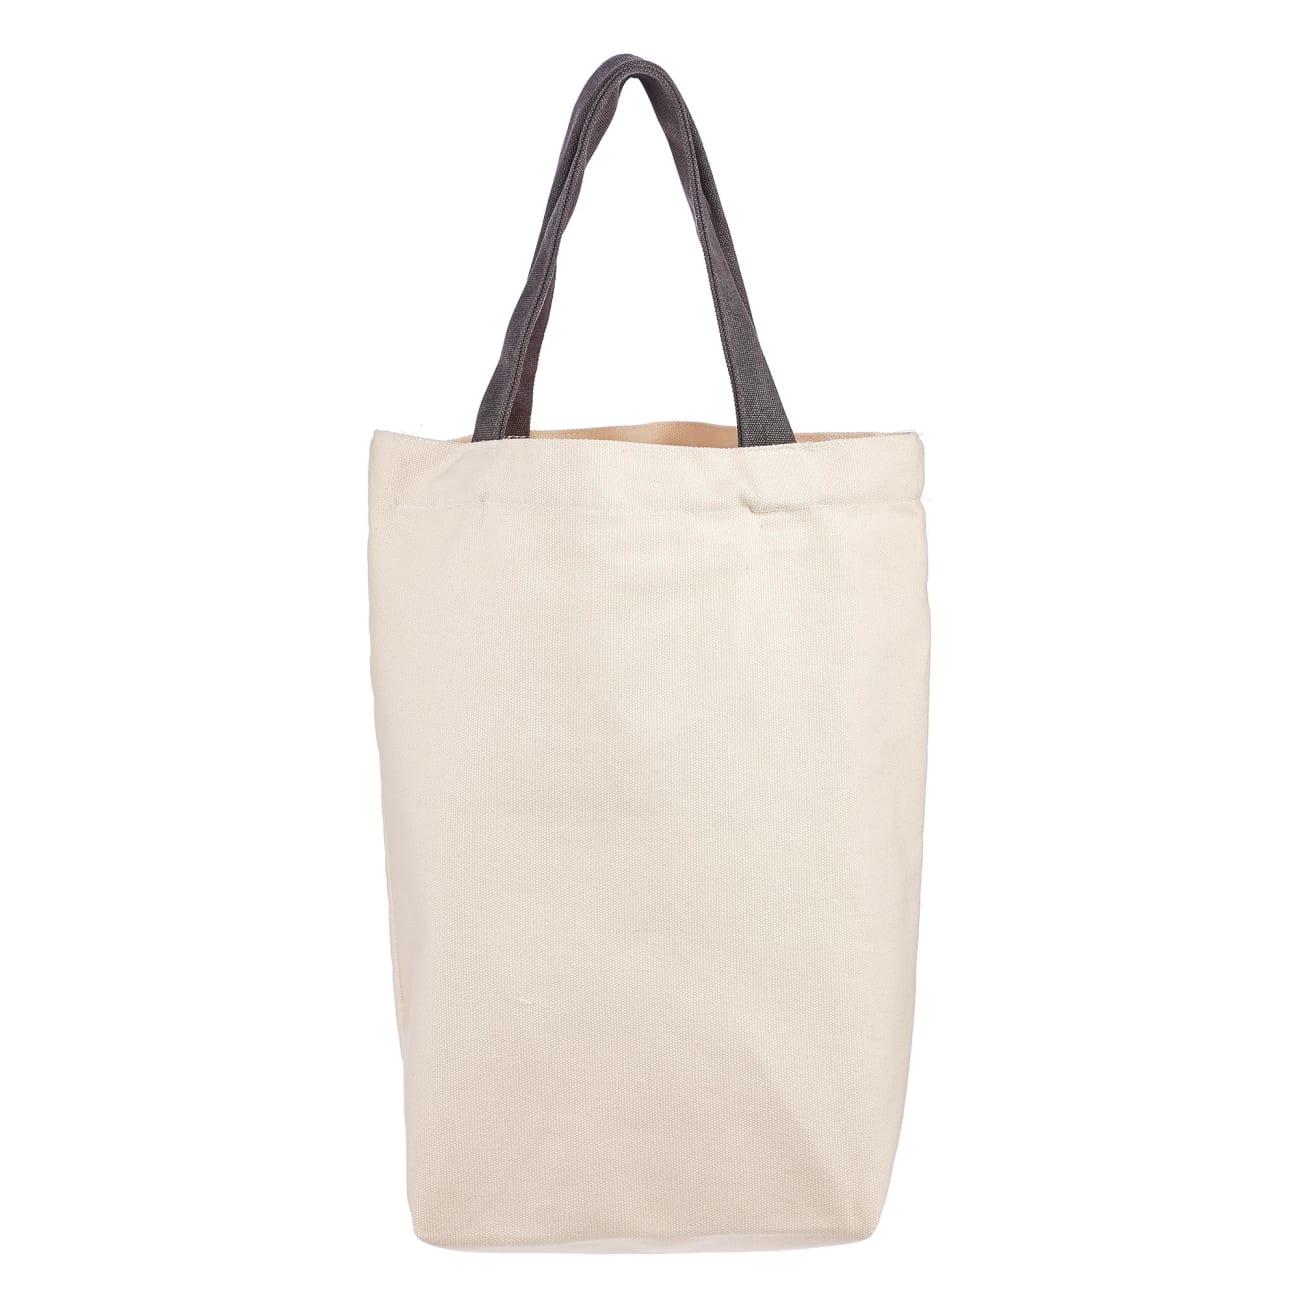 Canvas Tote Bag: Strength & Dignity, Proverbs 31:25 Soft Goods